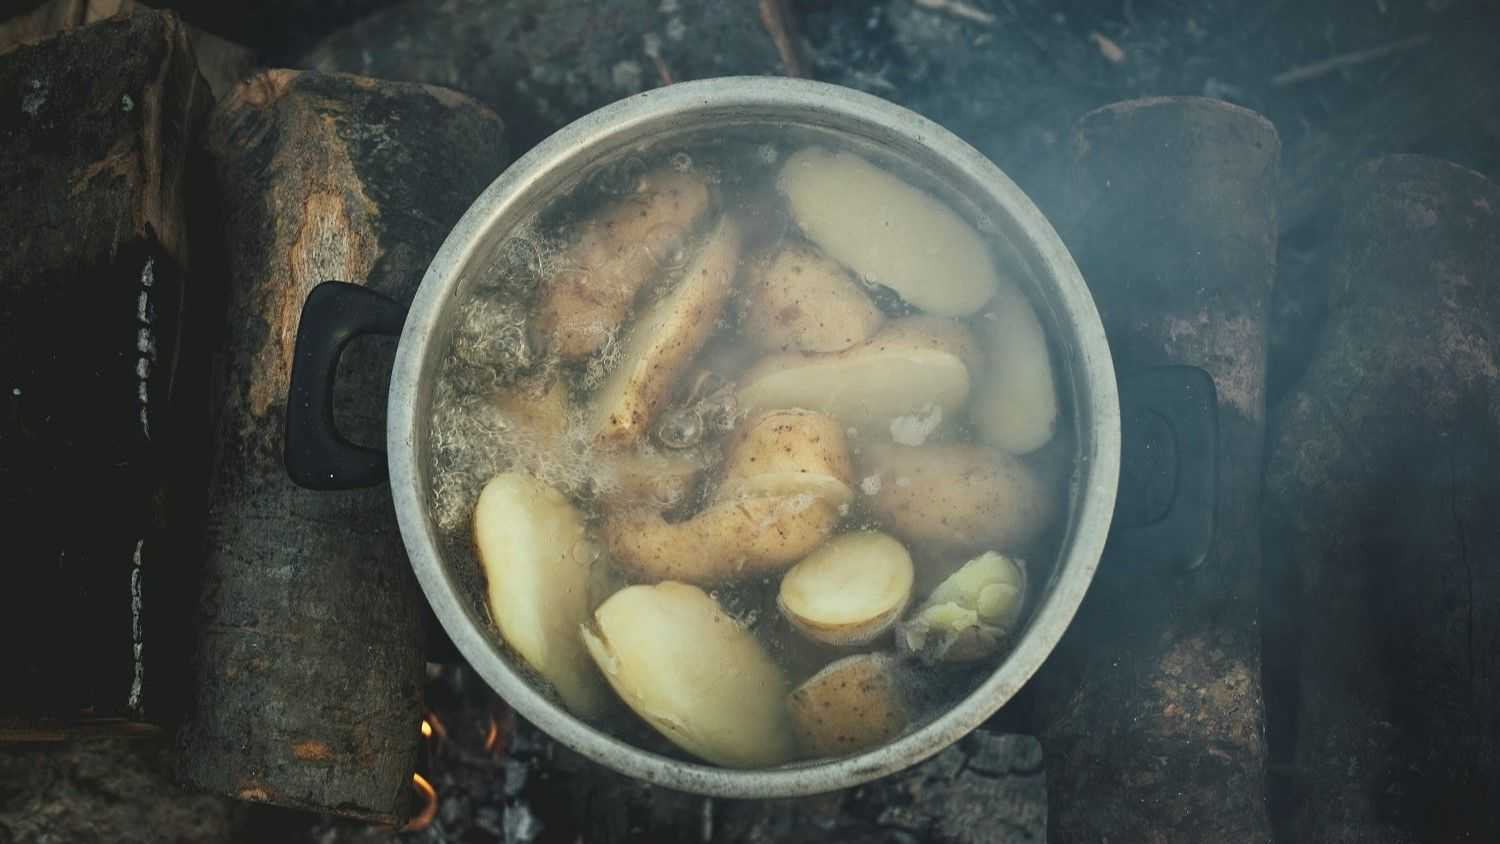 Boiling Potatoes in a pot on a wooden fireplace in Idomeni